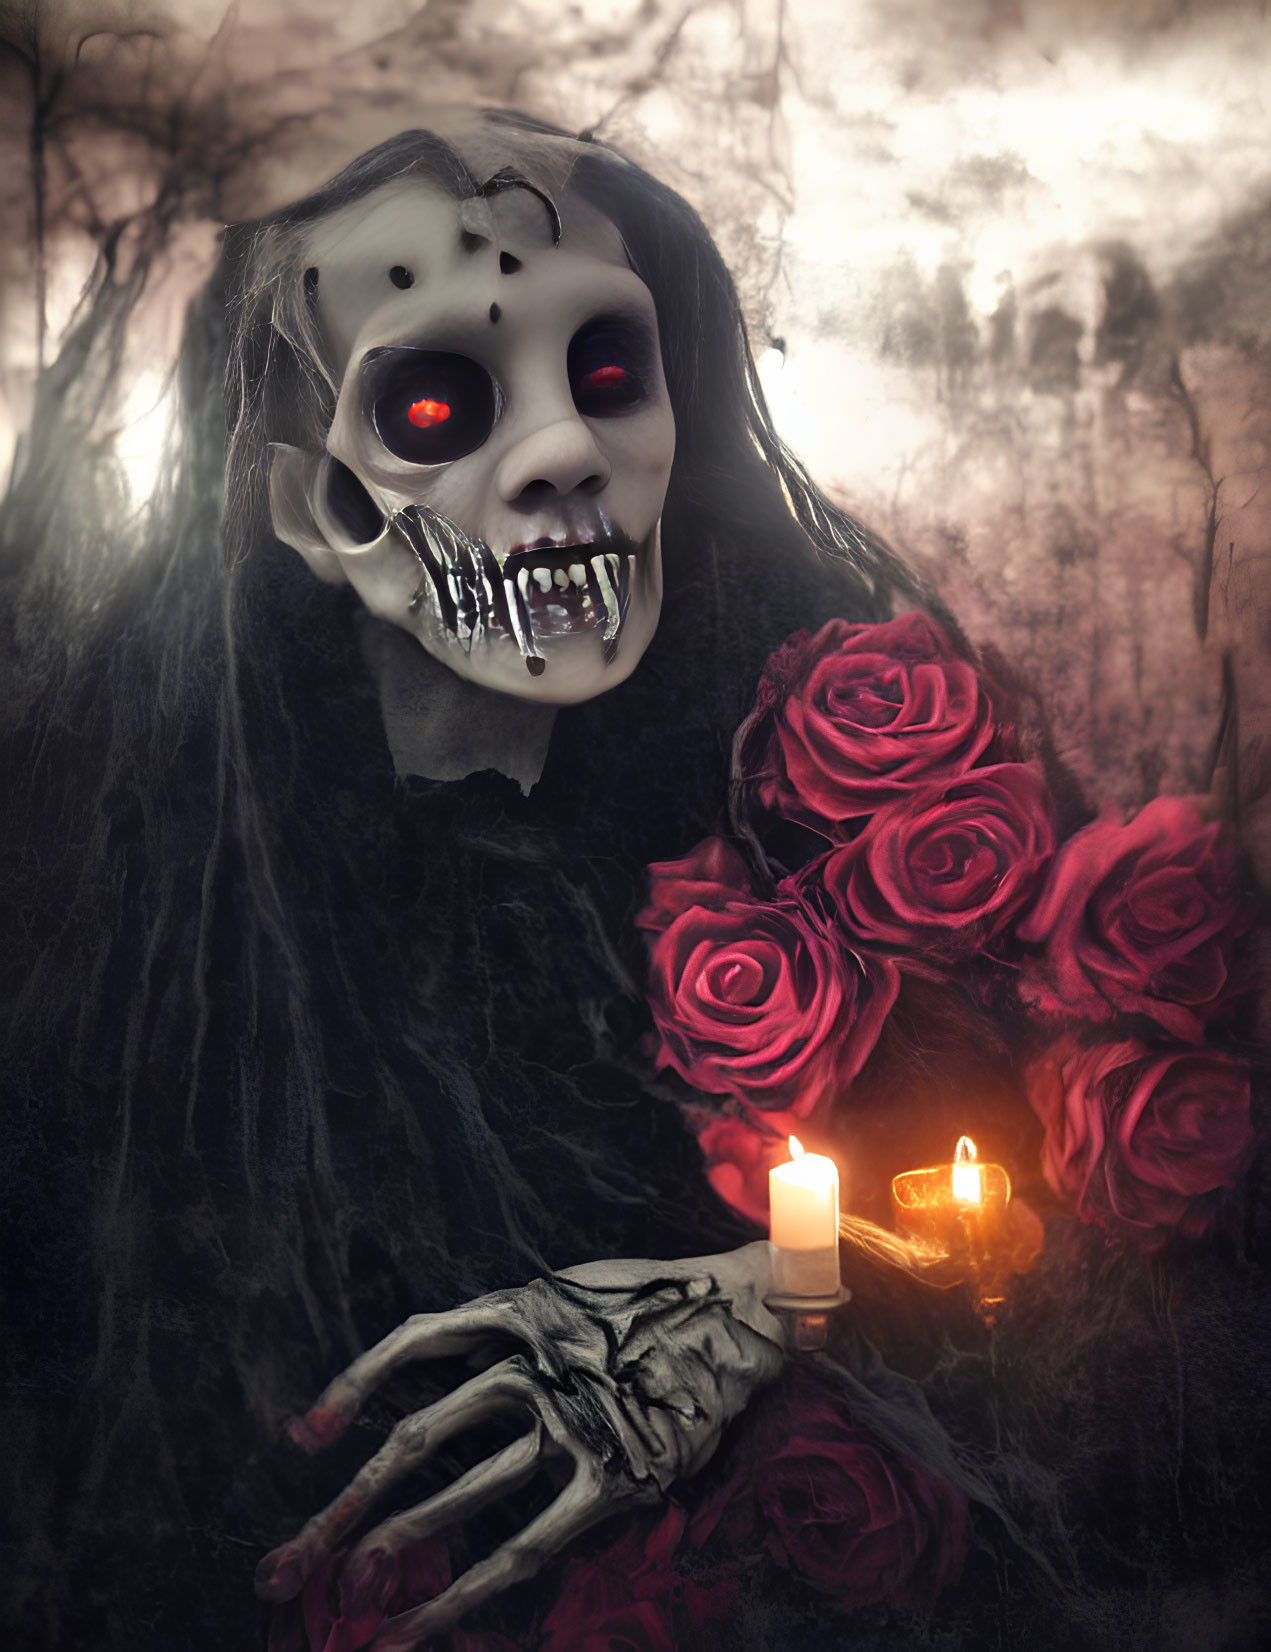 Skeletal figure with red roses in eerie forest setting